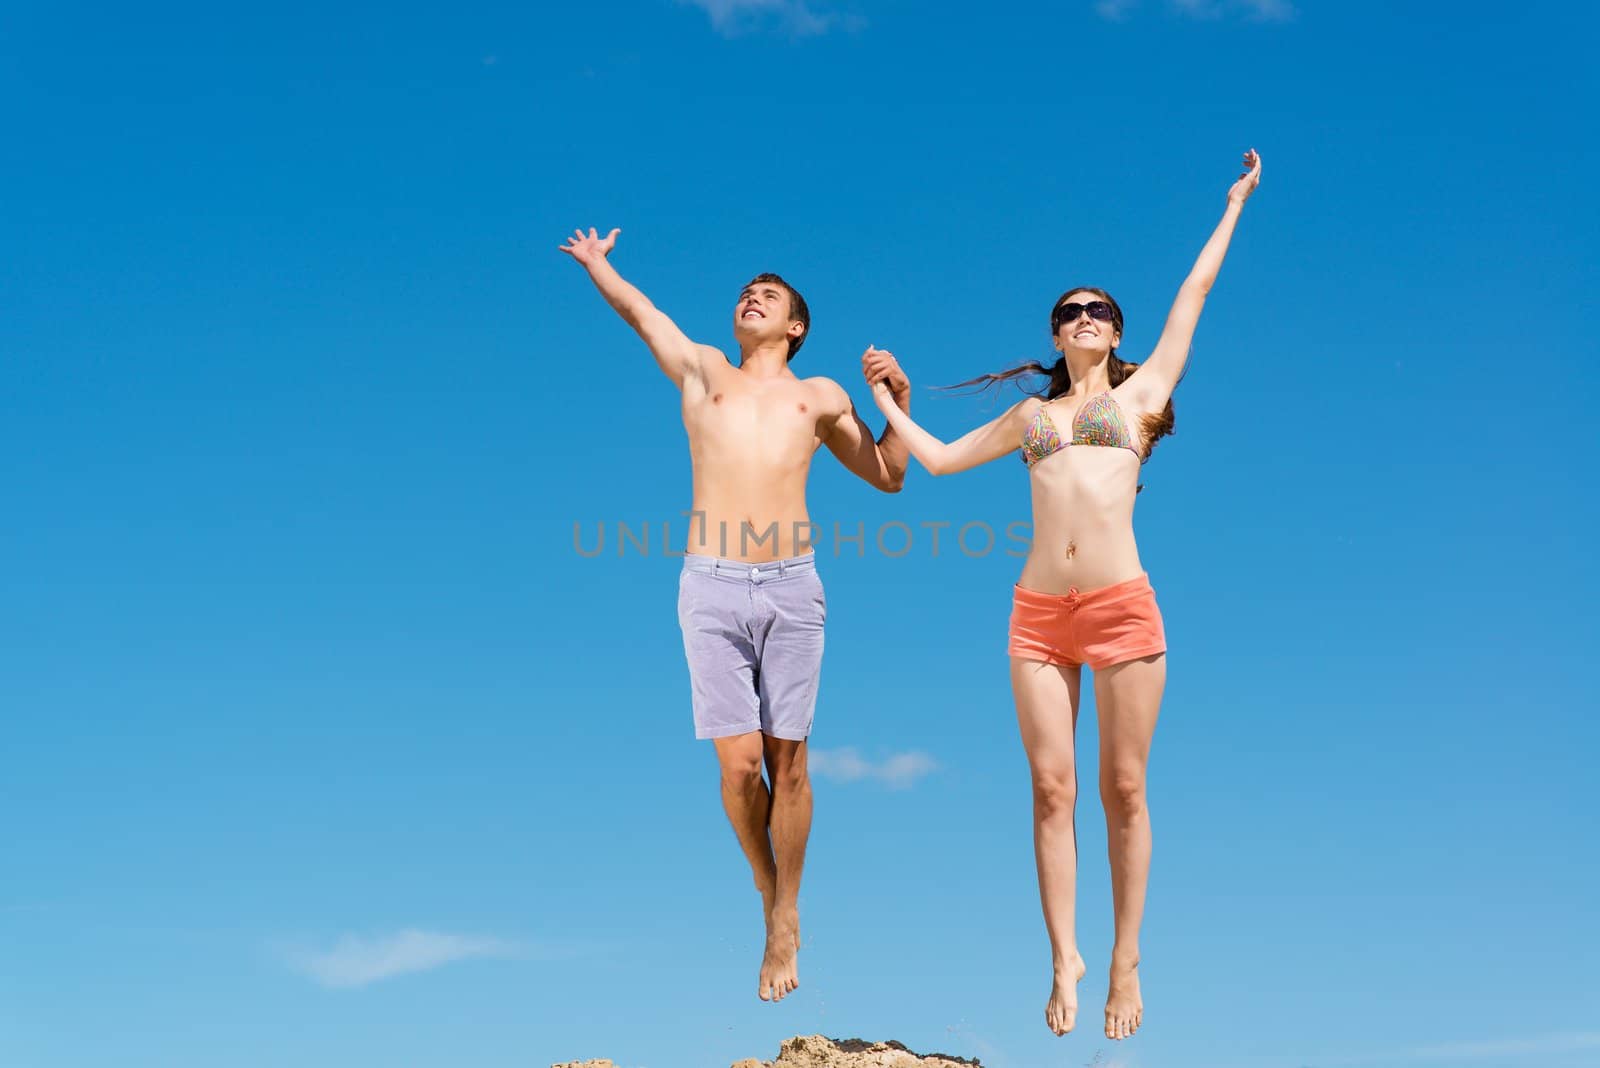 couple jumping together holding hands on a background of blue sky